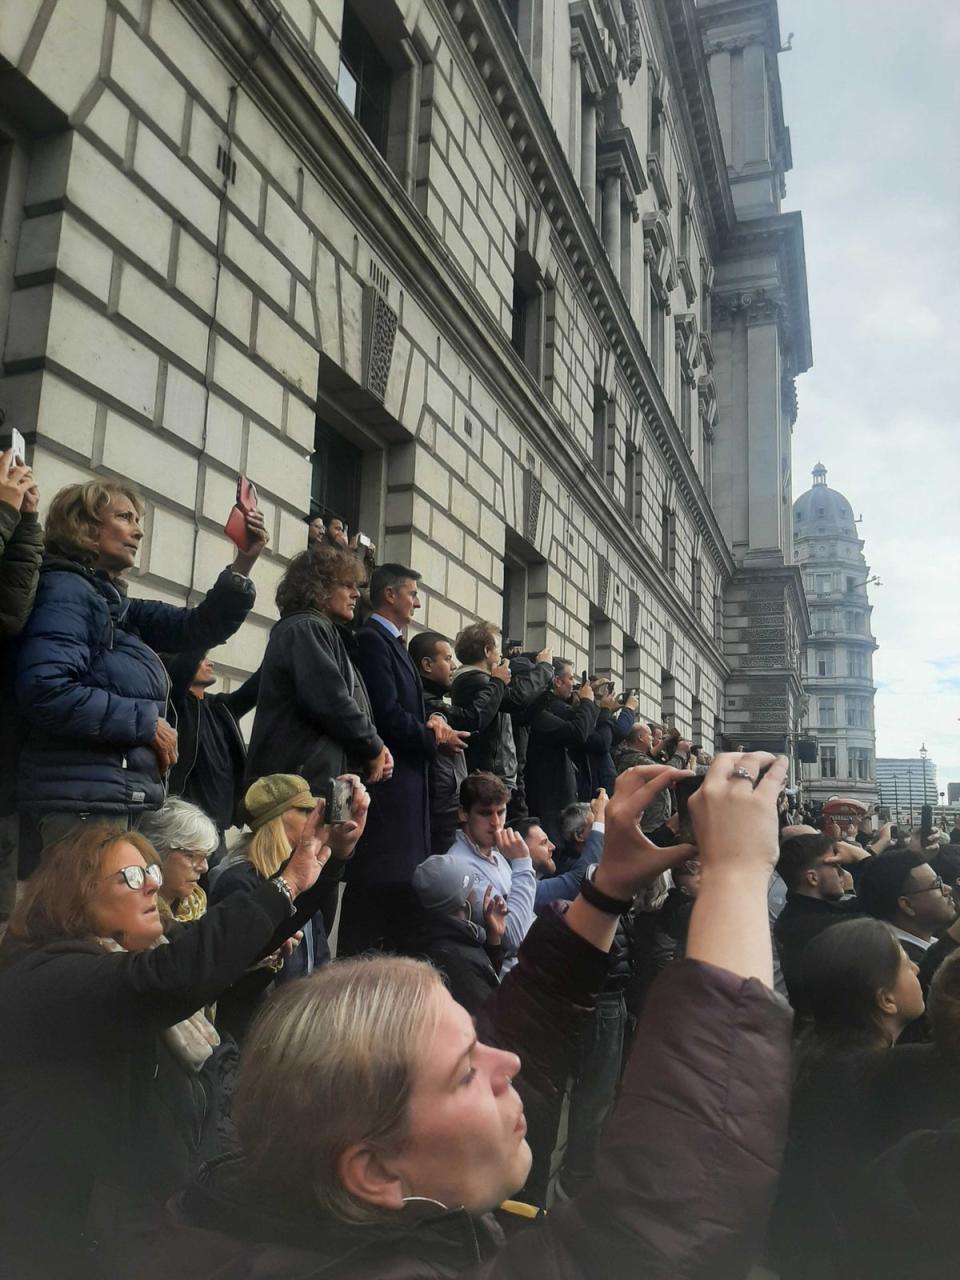 Mourners try to catch a glimpse of the Queen’s coffin on the way to the state funeral (Zoe Tidman / The Independent)